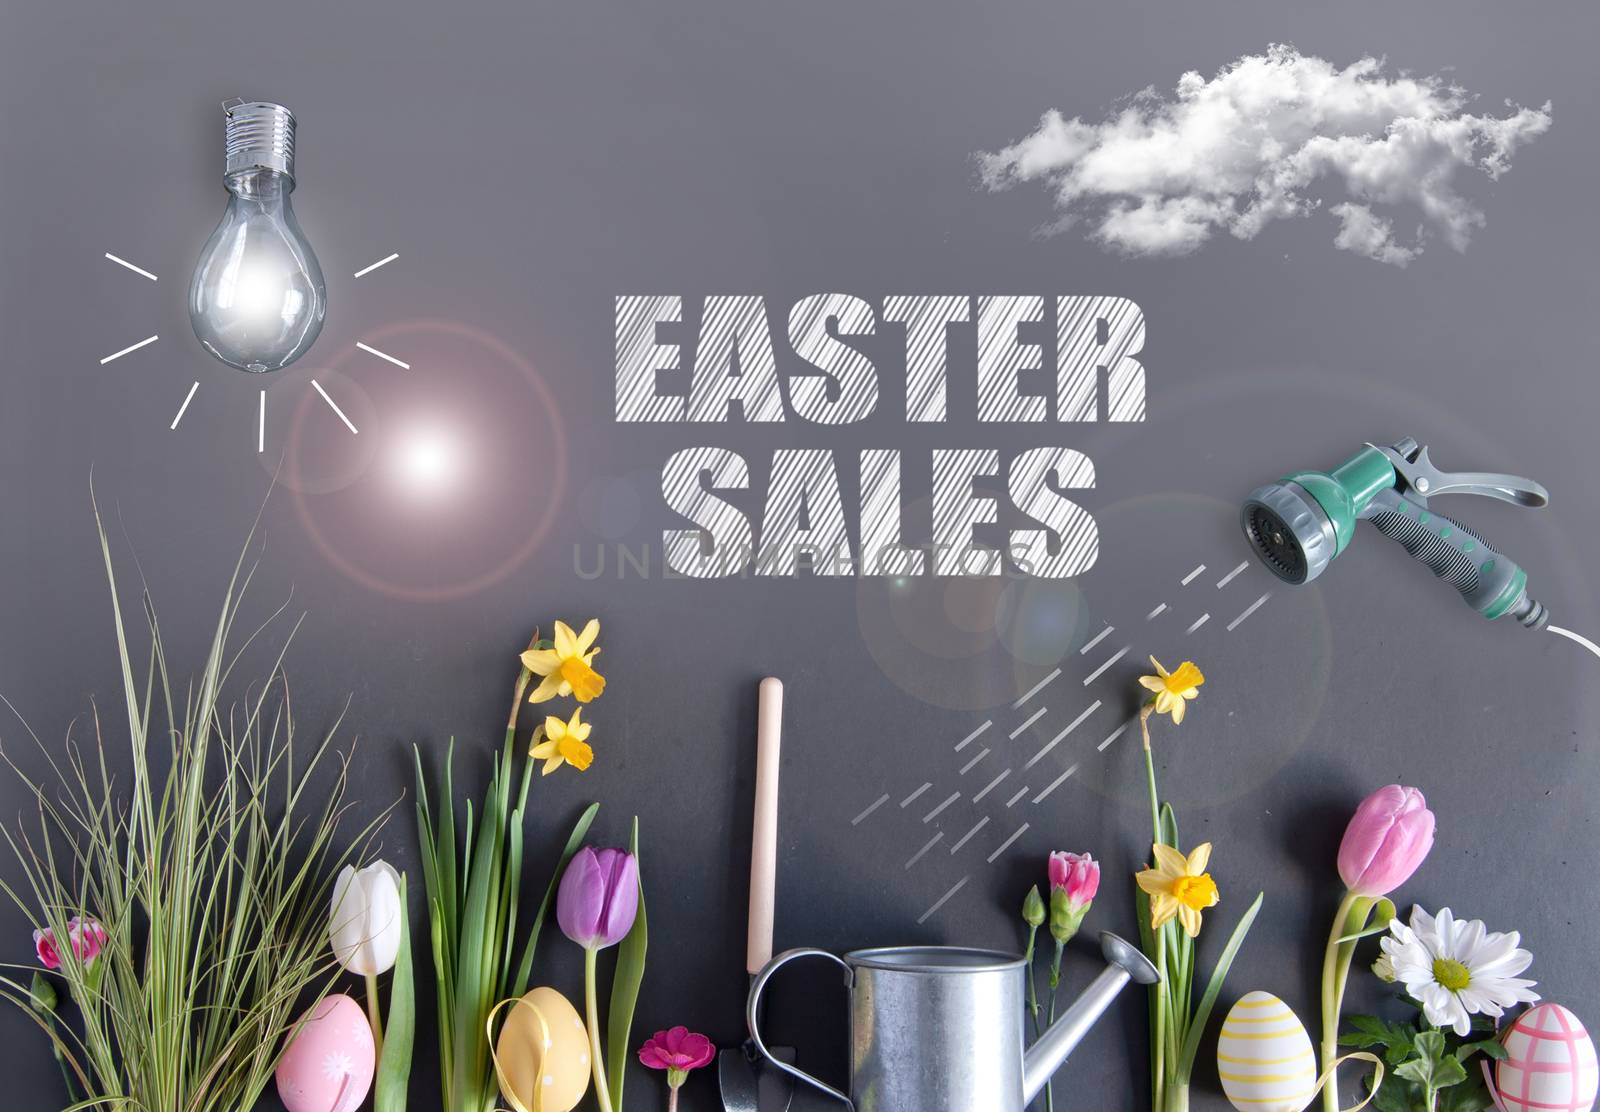 Easter sales garden background with light bulb as sun, clouds, and hose watering flowers laid flat on a chalkboard 